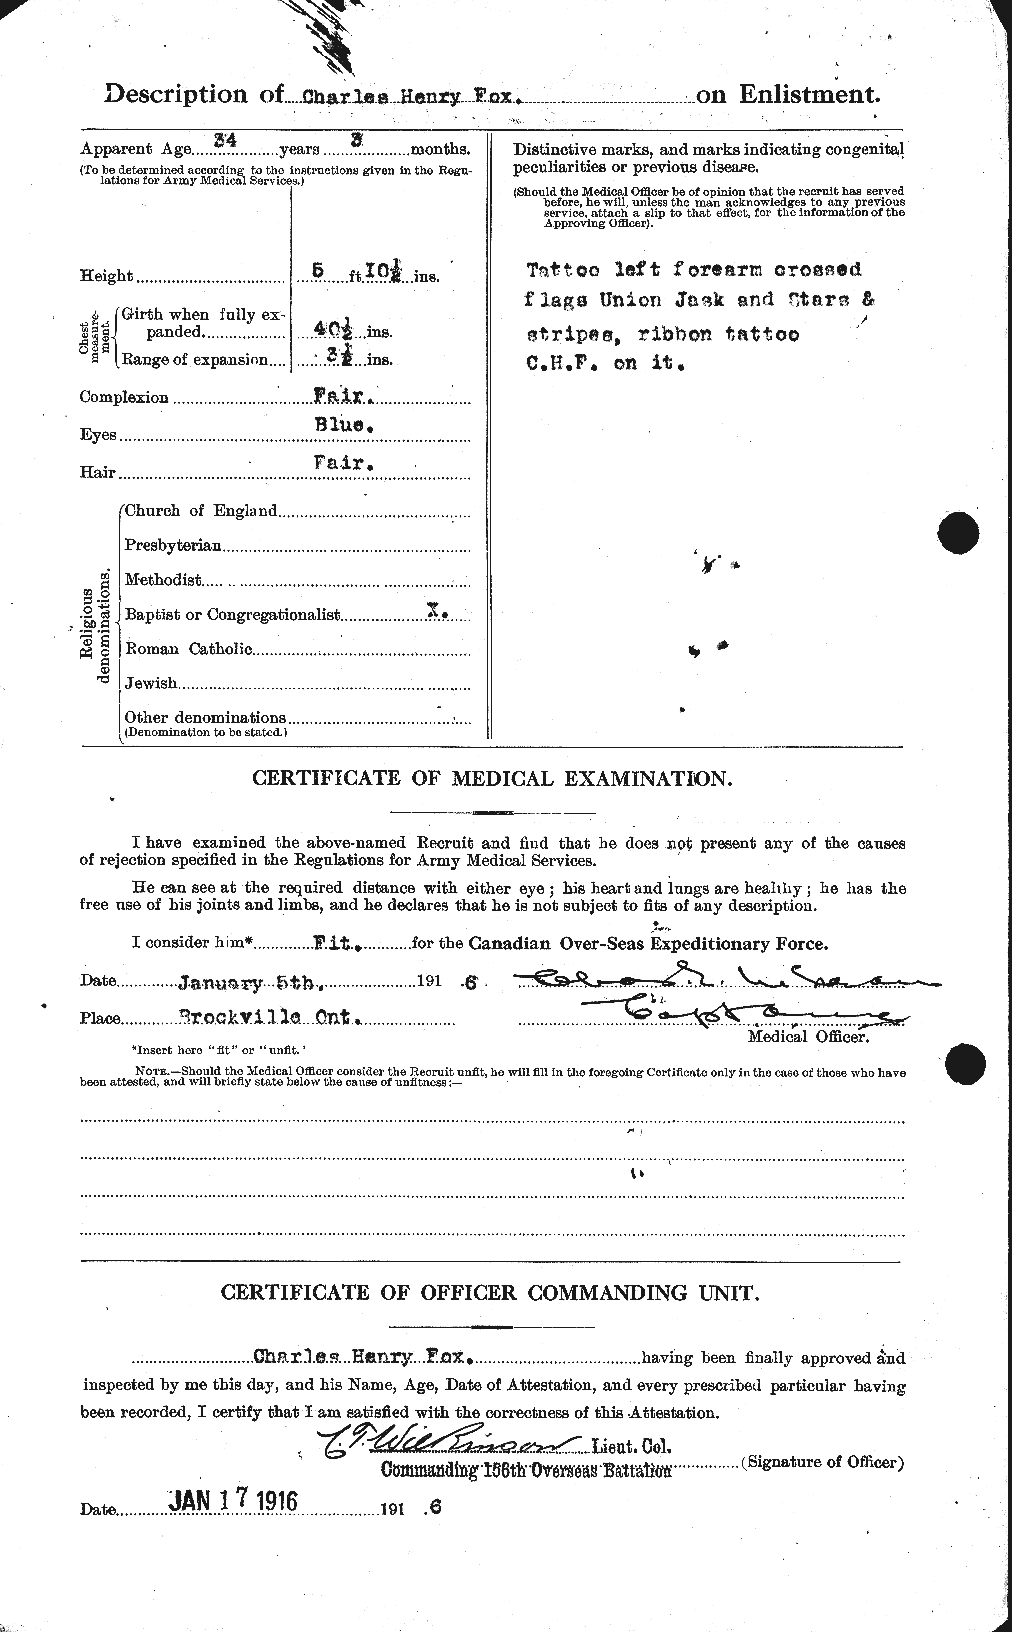 Personnel Records of the First World War - CEF 331254b